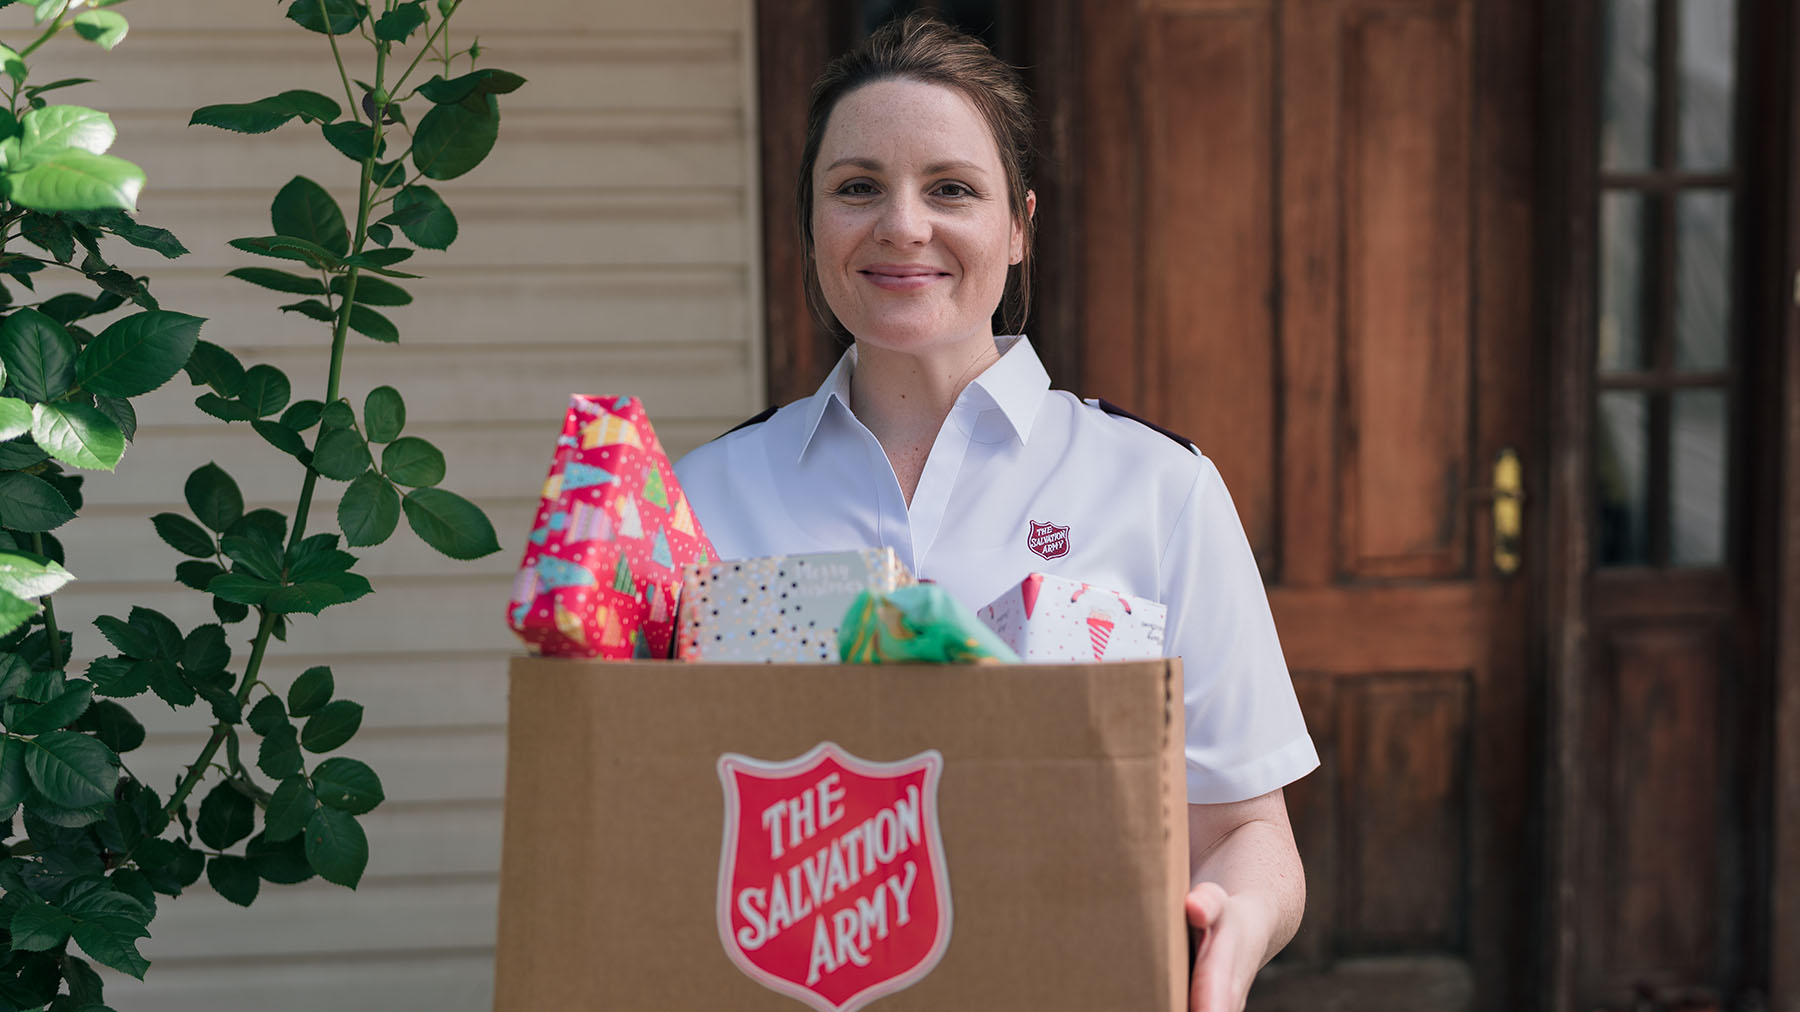 Salvos officer holding Christmas gifts